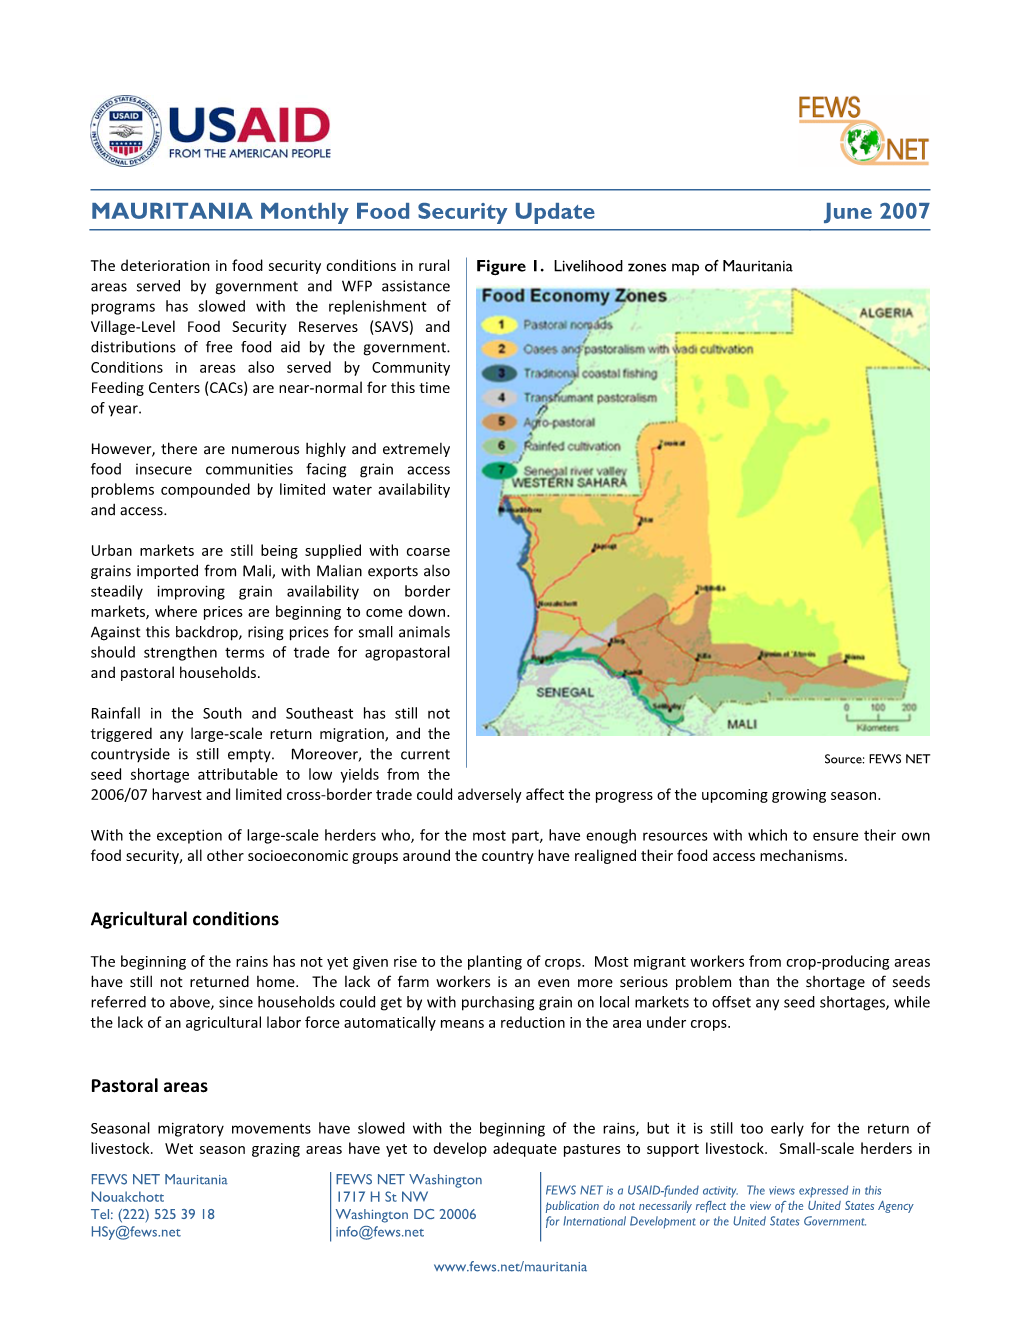 Mauritania Monthly Food Security Update, June 2007